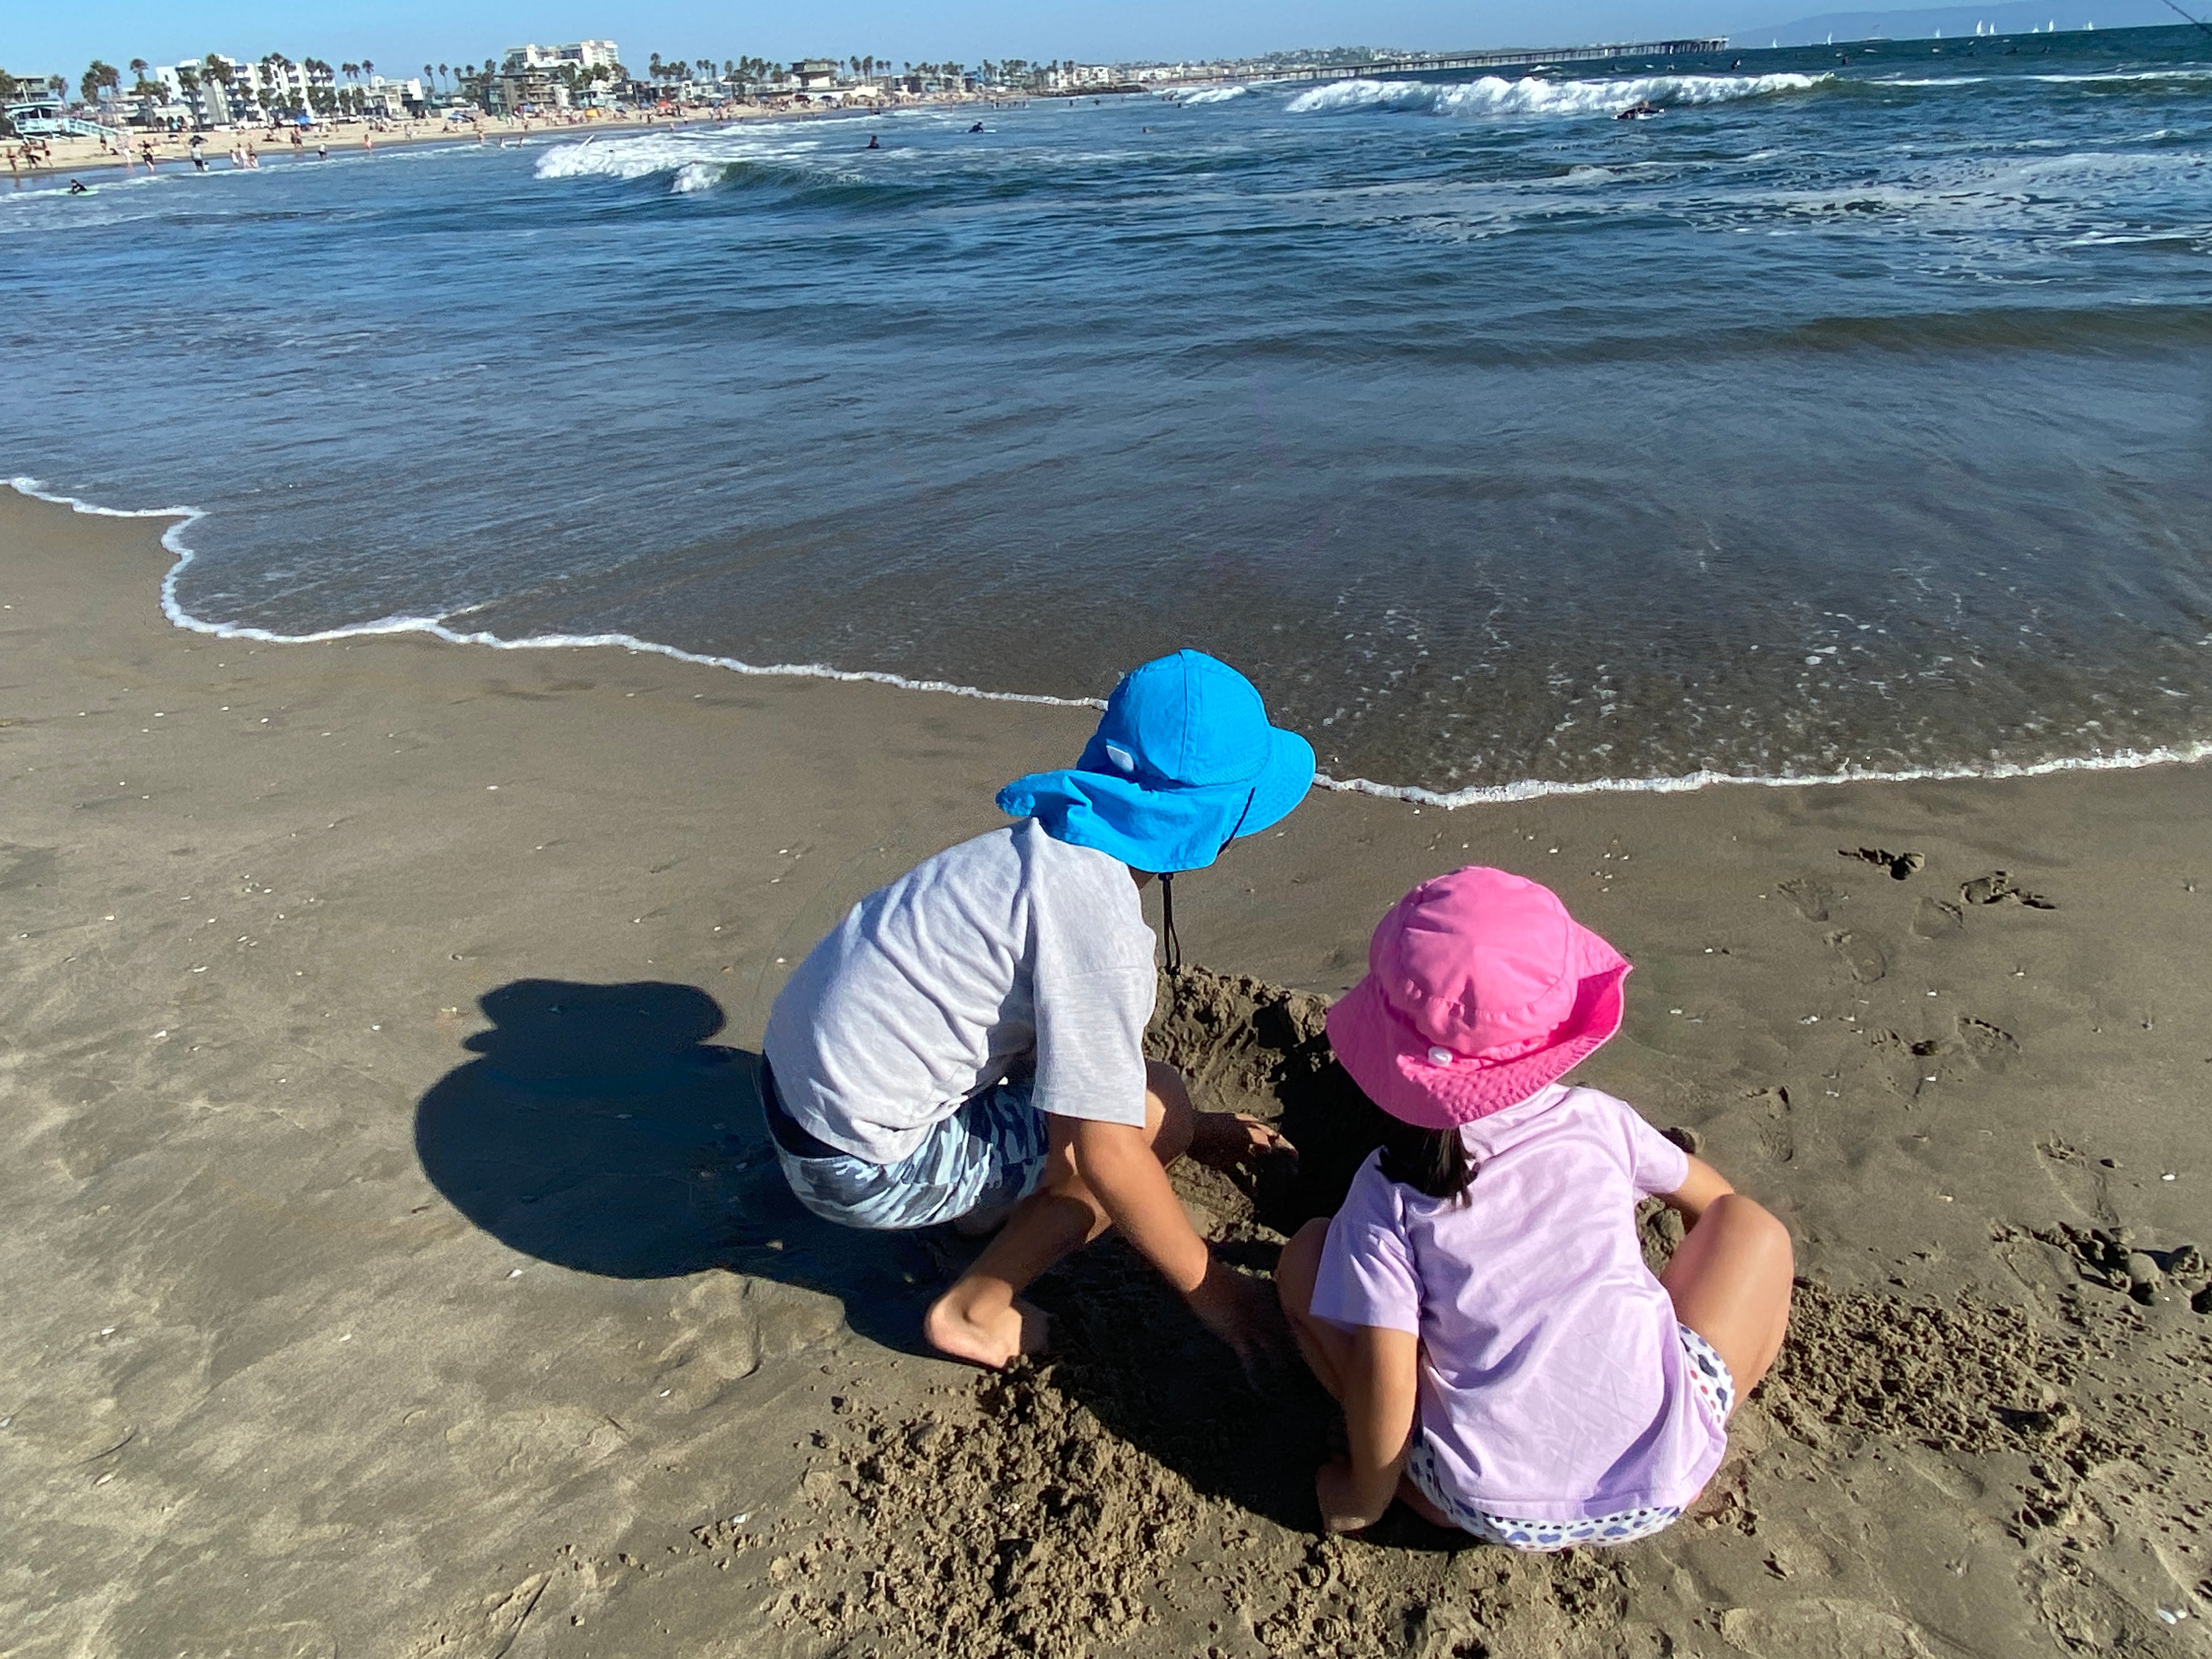 Kids playing on the beach, Biodegradable products